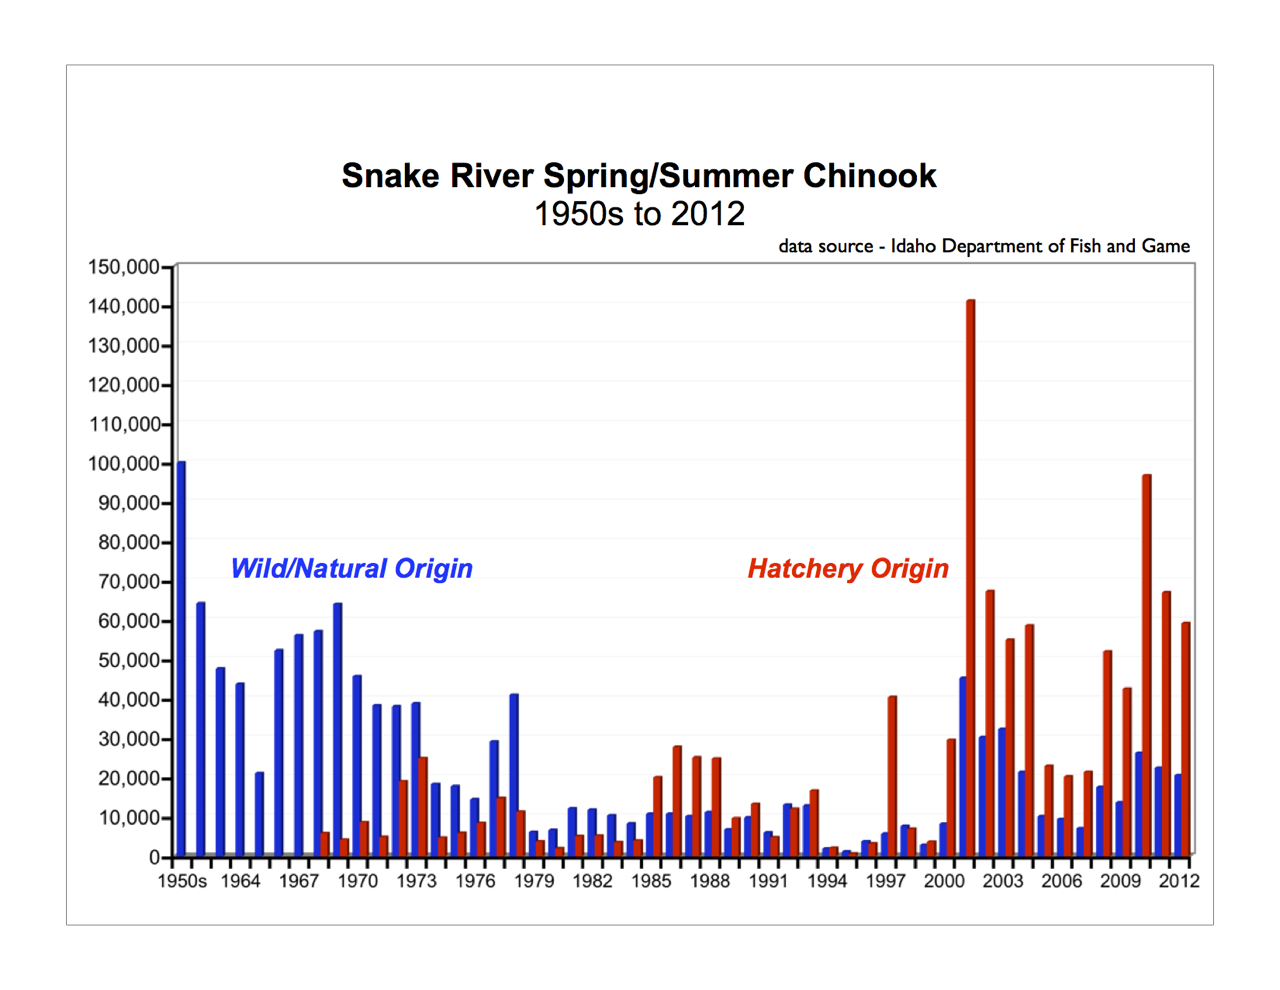 Graphic: Snake River returns of Spring/Summer Chinook 1950s to 2012. (data source: Idaho Fish & Game